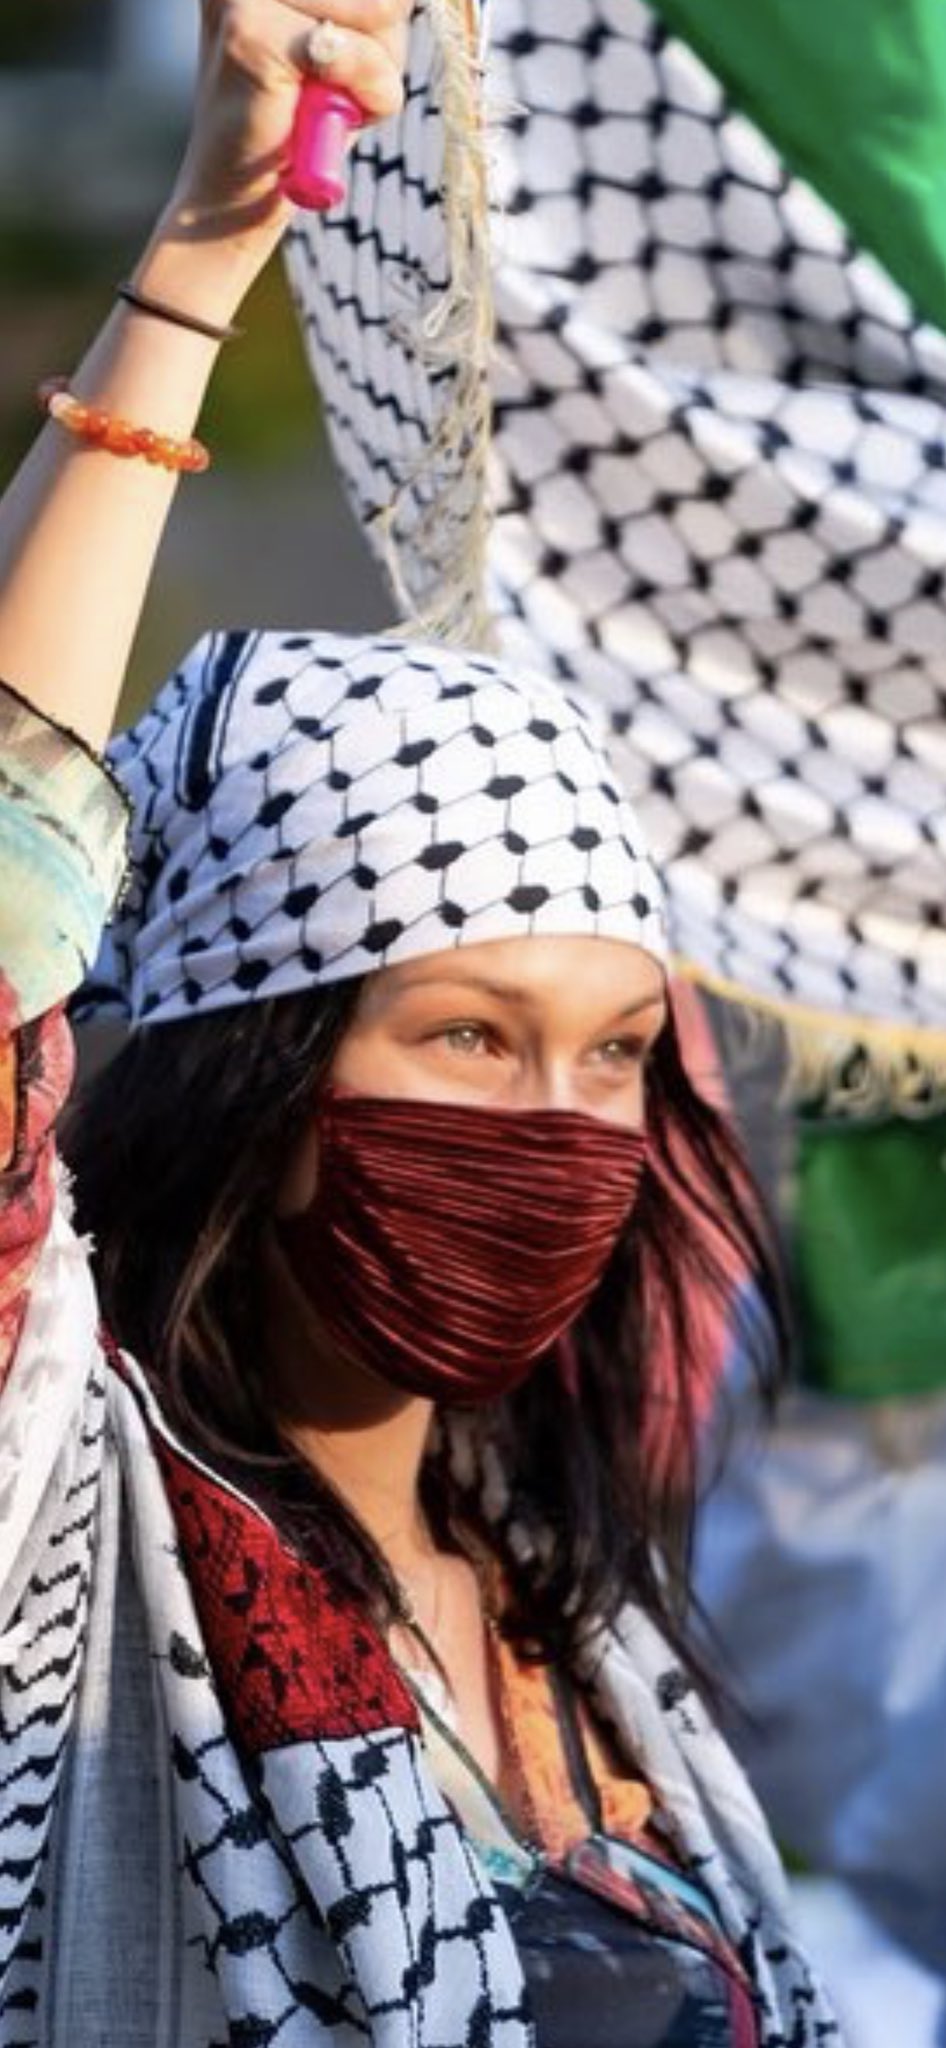 Tom Fordy on X: Bella #Hadid joins pro-Palestine march in NYC 🇺🇸wearing  a traditional dress, a #Keffiyeh, a face mask and waving a large  Palestinian Pale🇵🇸 flag as she marched along with